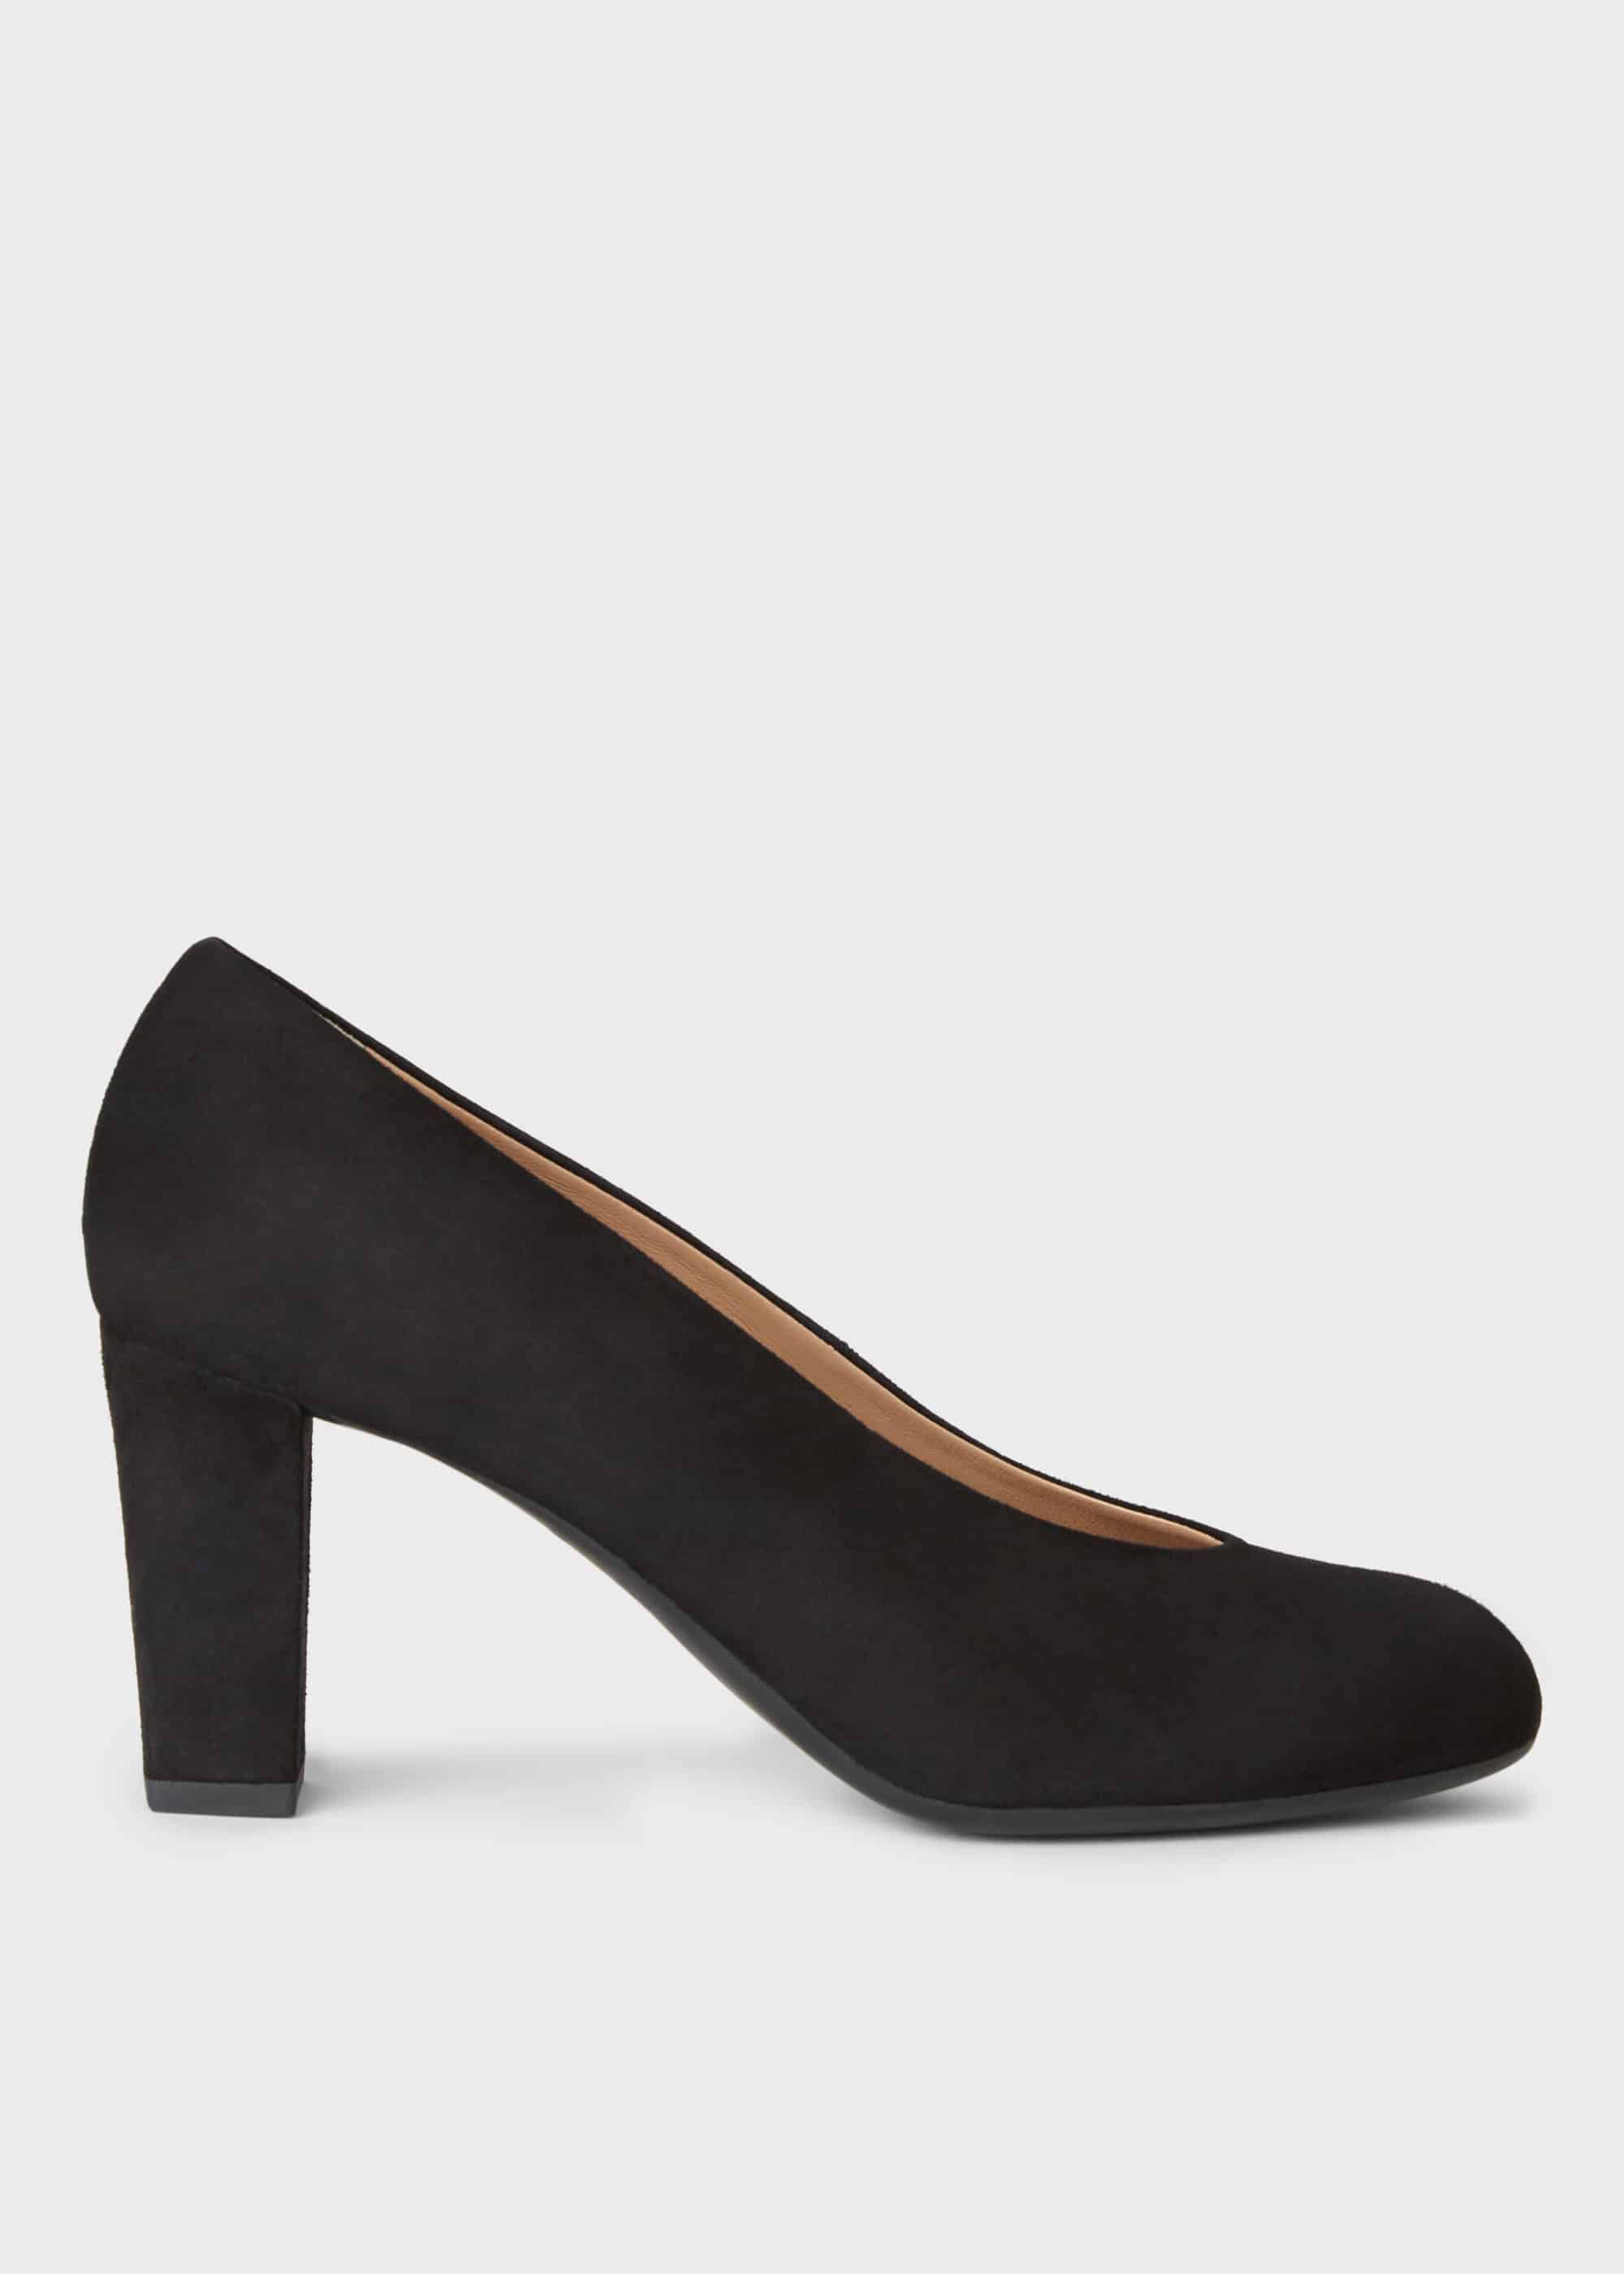 hobbs shoes clearance